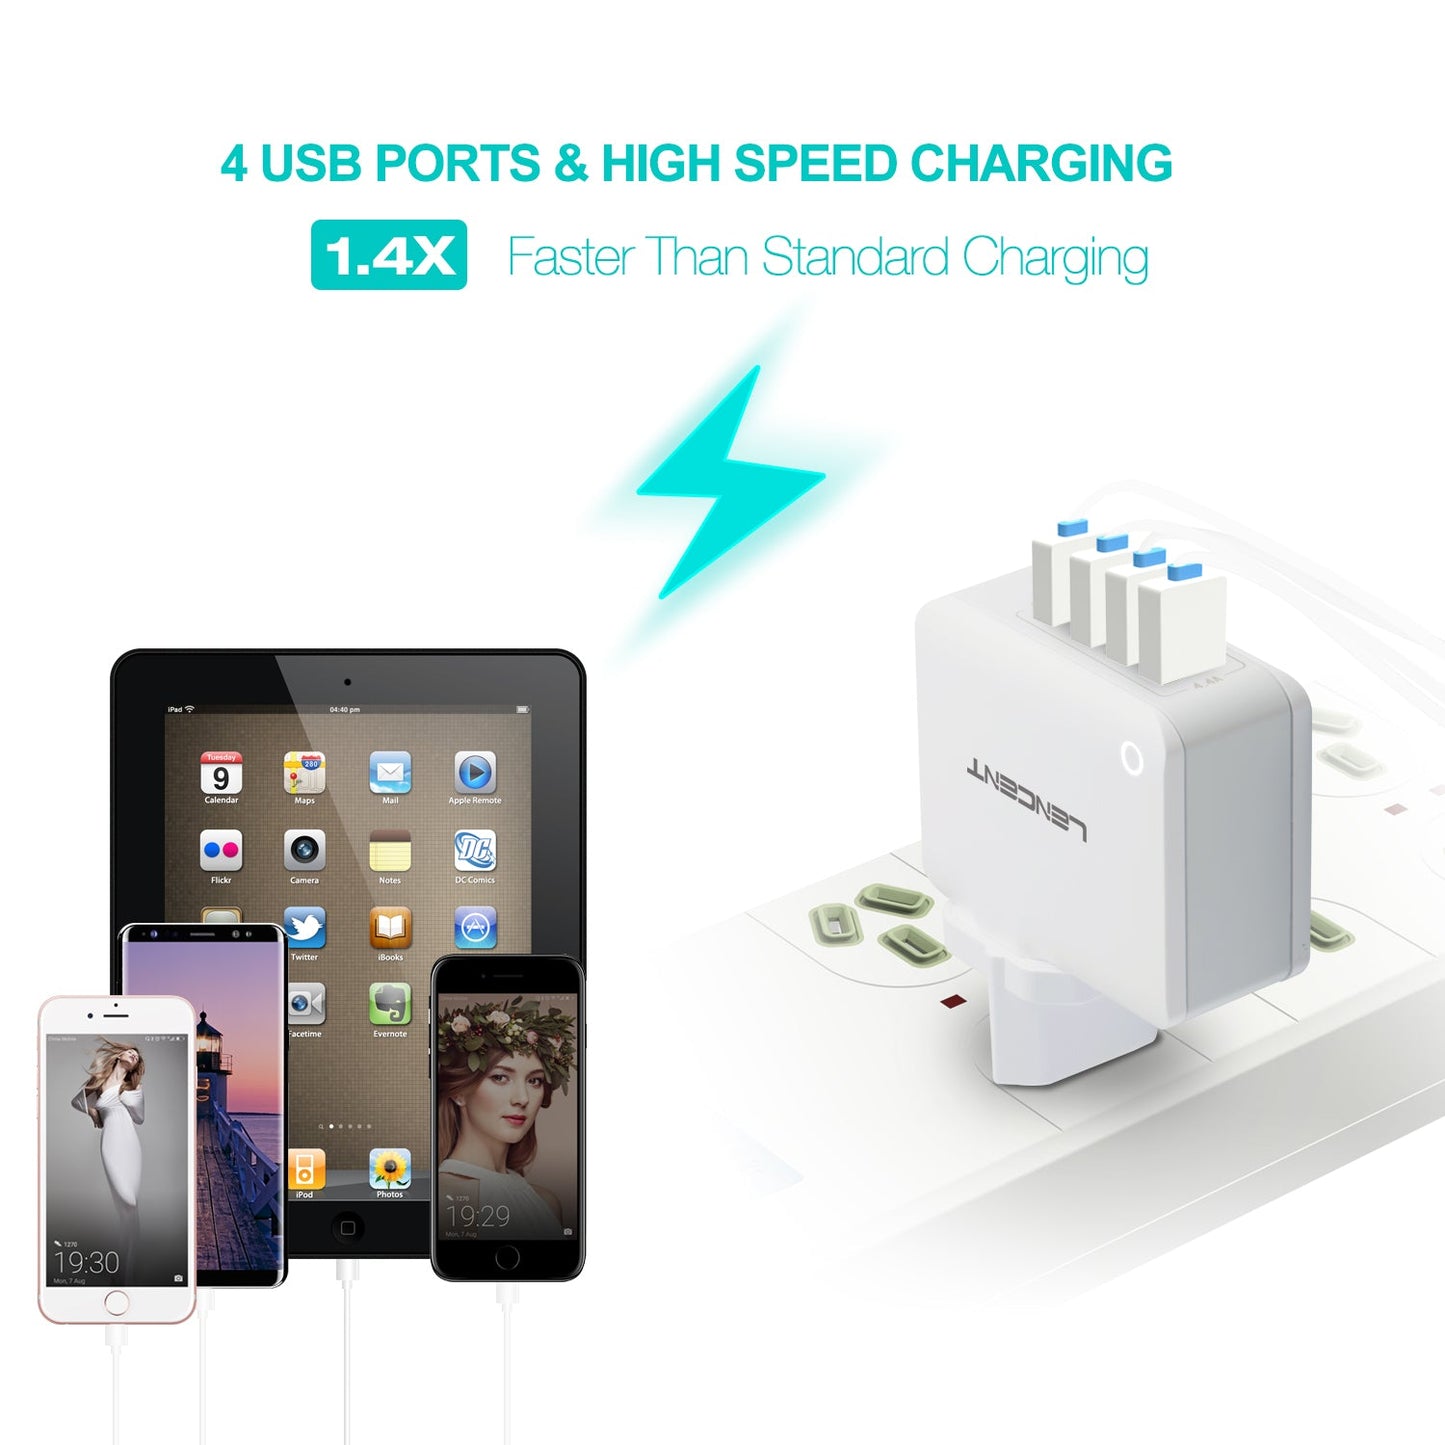 Lencent 4 Port USB Wall Charger with Worldwide Universal Adapters 22W/5V 4.4A - RLO Tech